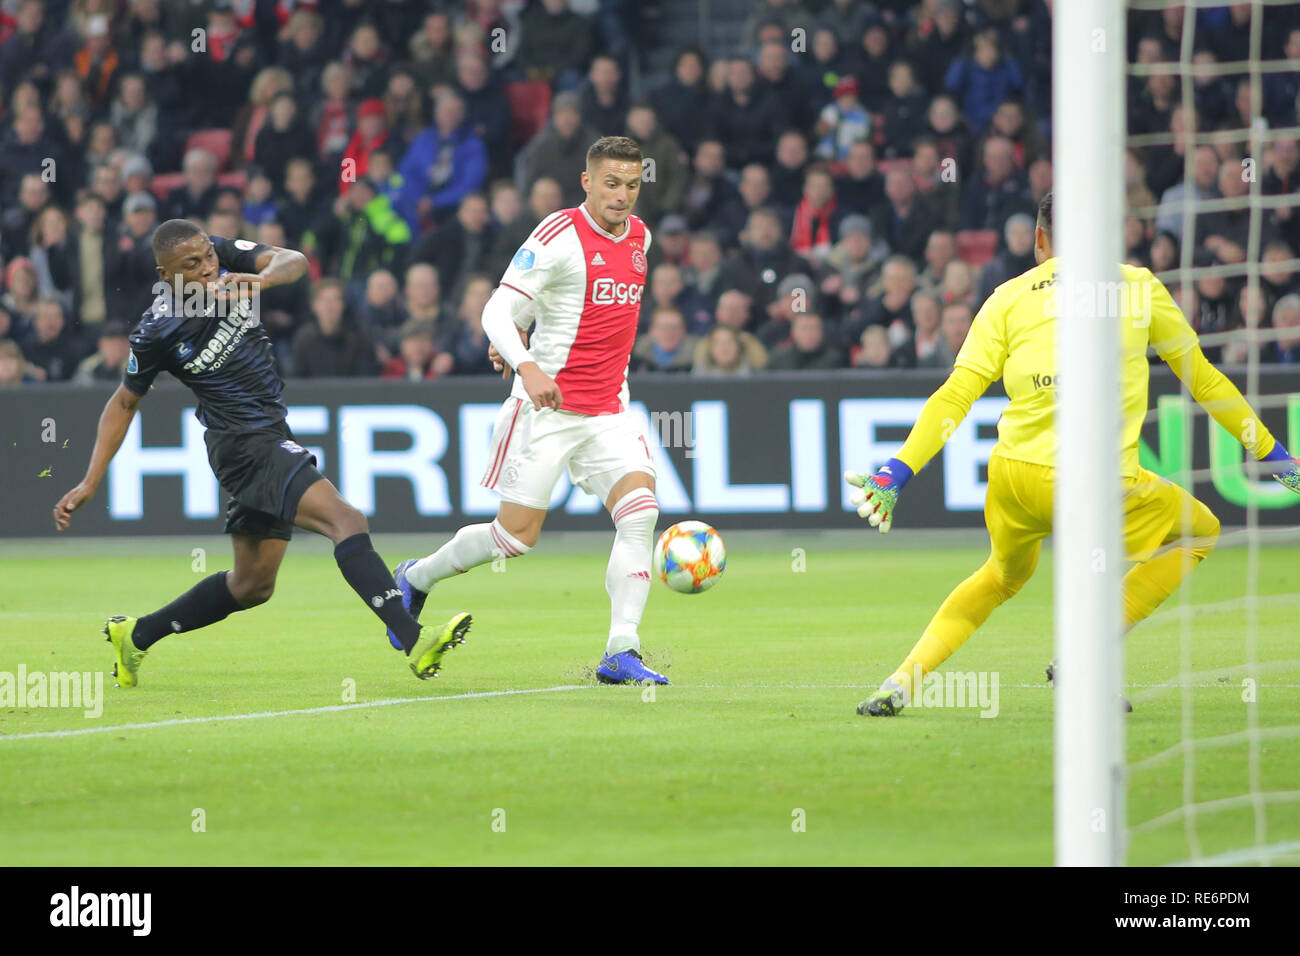 Amsterdam, Netherlands. 20th January 2019. Ajax midfielder Dusan Tadic runs with the ball during the game against Heerenveen for a match in the Dutch first division. Amsterdam, Netherlands, January 20, 2019. Credit: Federico Guerra Maranesi/Alamy Live News Stock Photo